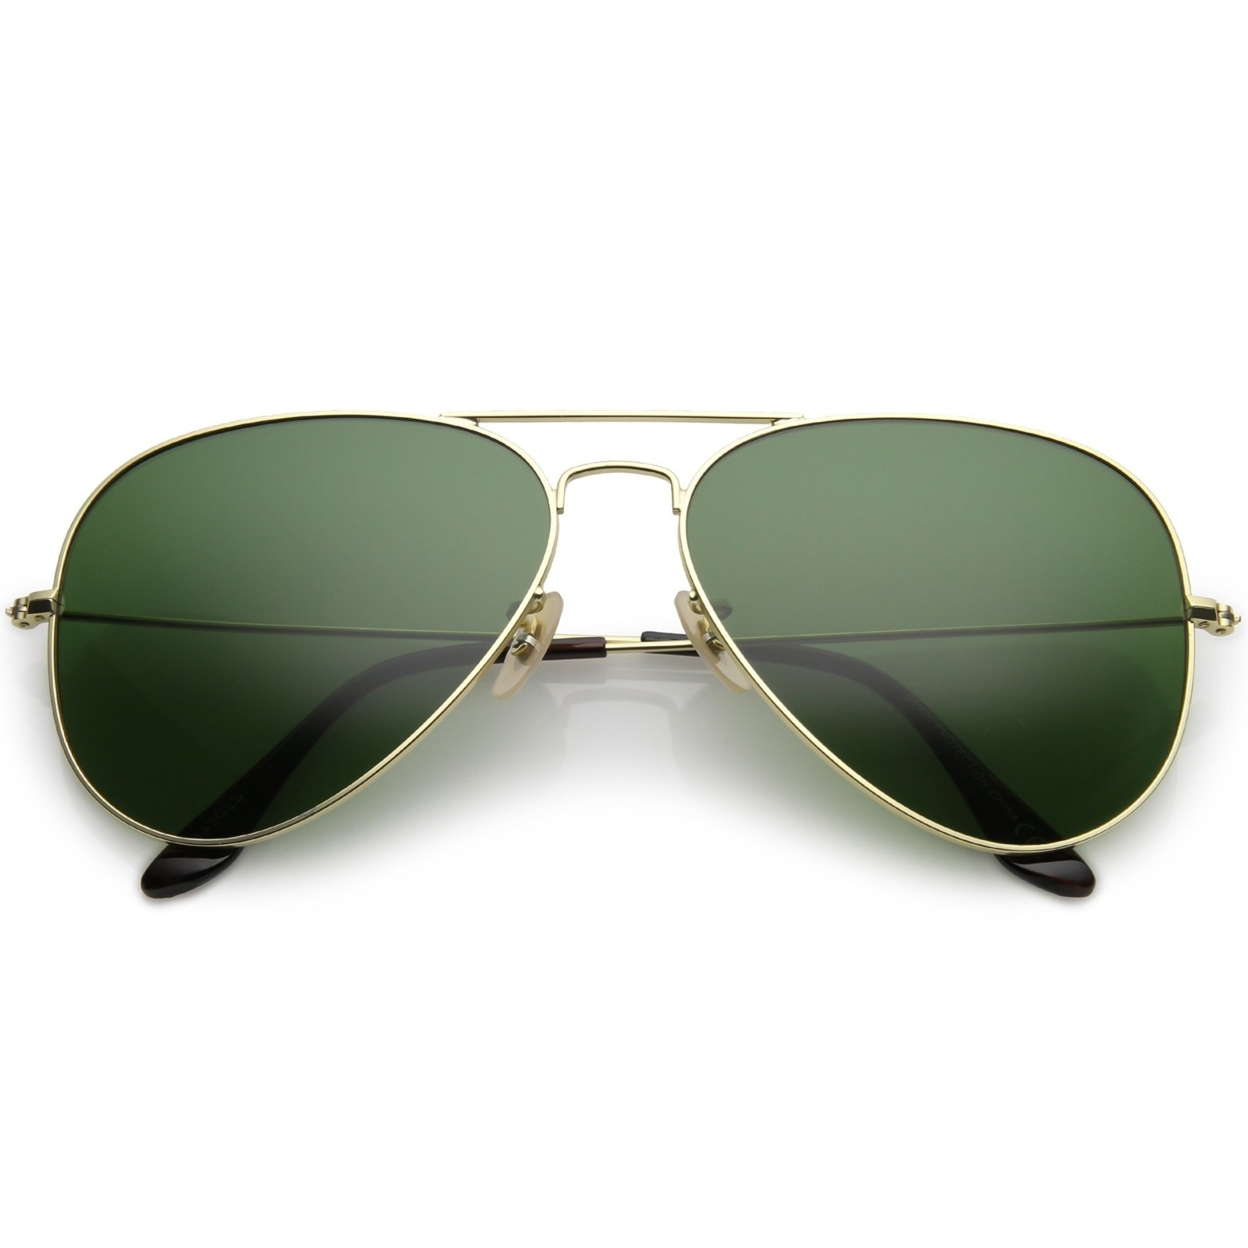 Premium Large Classic Matte Metal Aviator Sunglasses With Green Tinted Glass Lens 61mm - Gold / Green